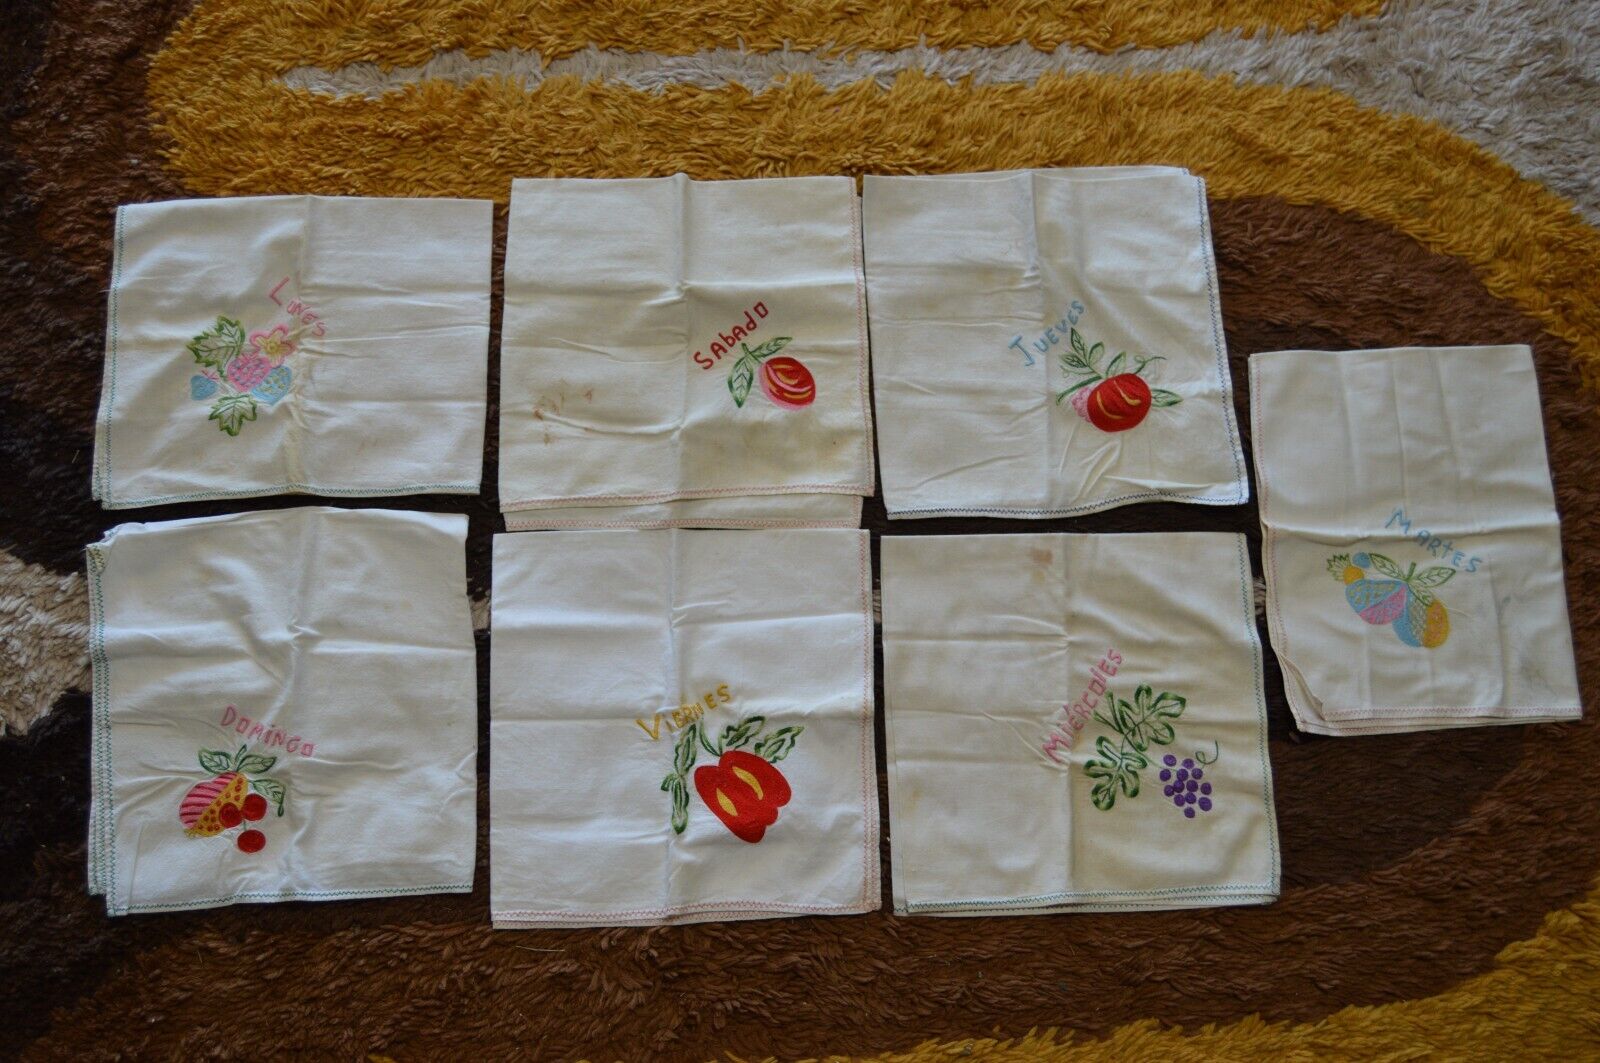 7 Vintage Spanish Embroidery Dish Towels Days of the Week Collectible Kitchen